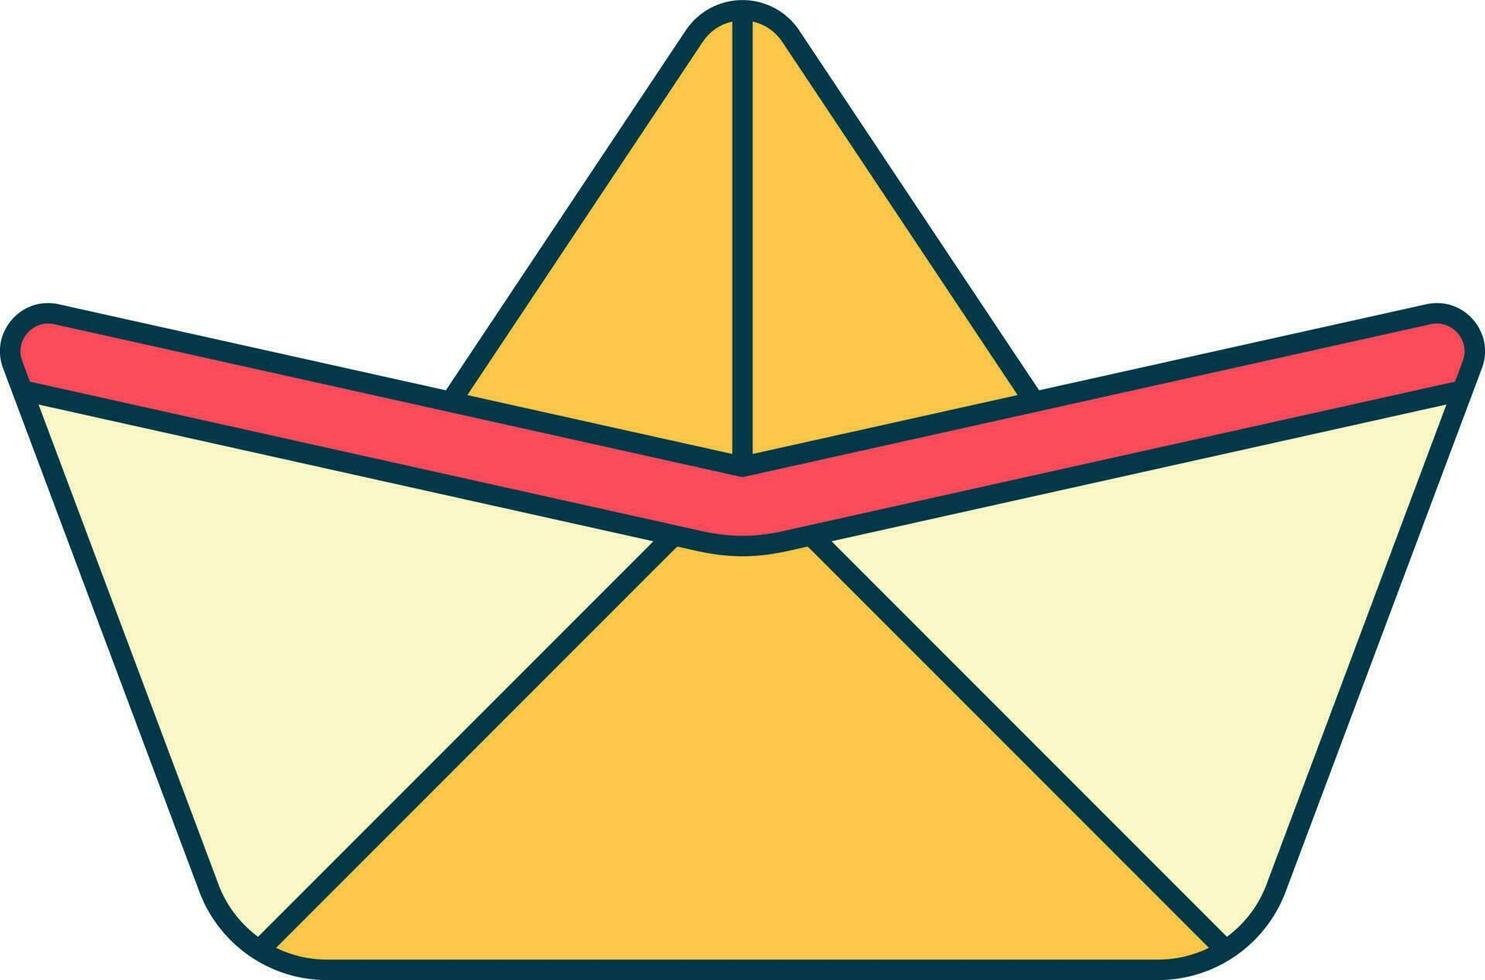 Paper Boat Icon In Red And Yellow Color. vector